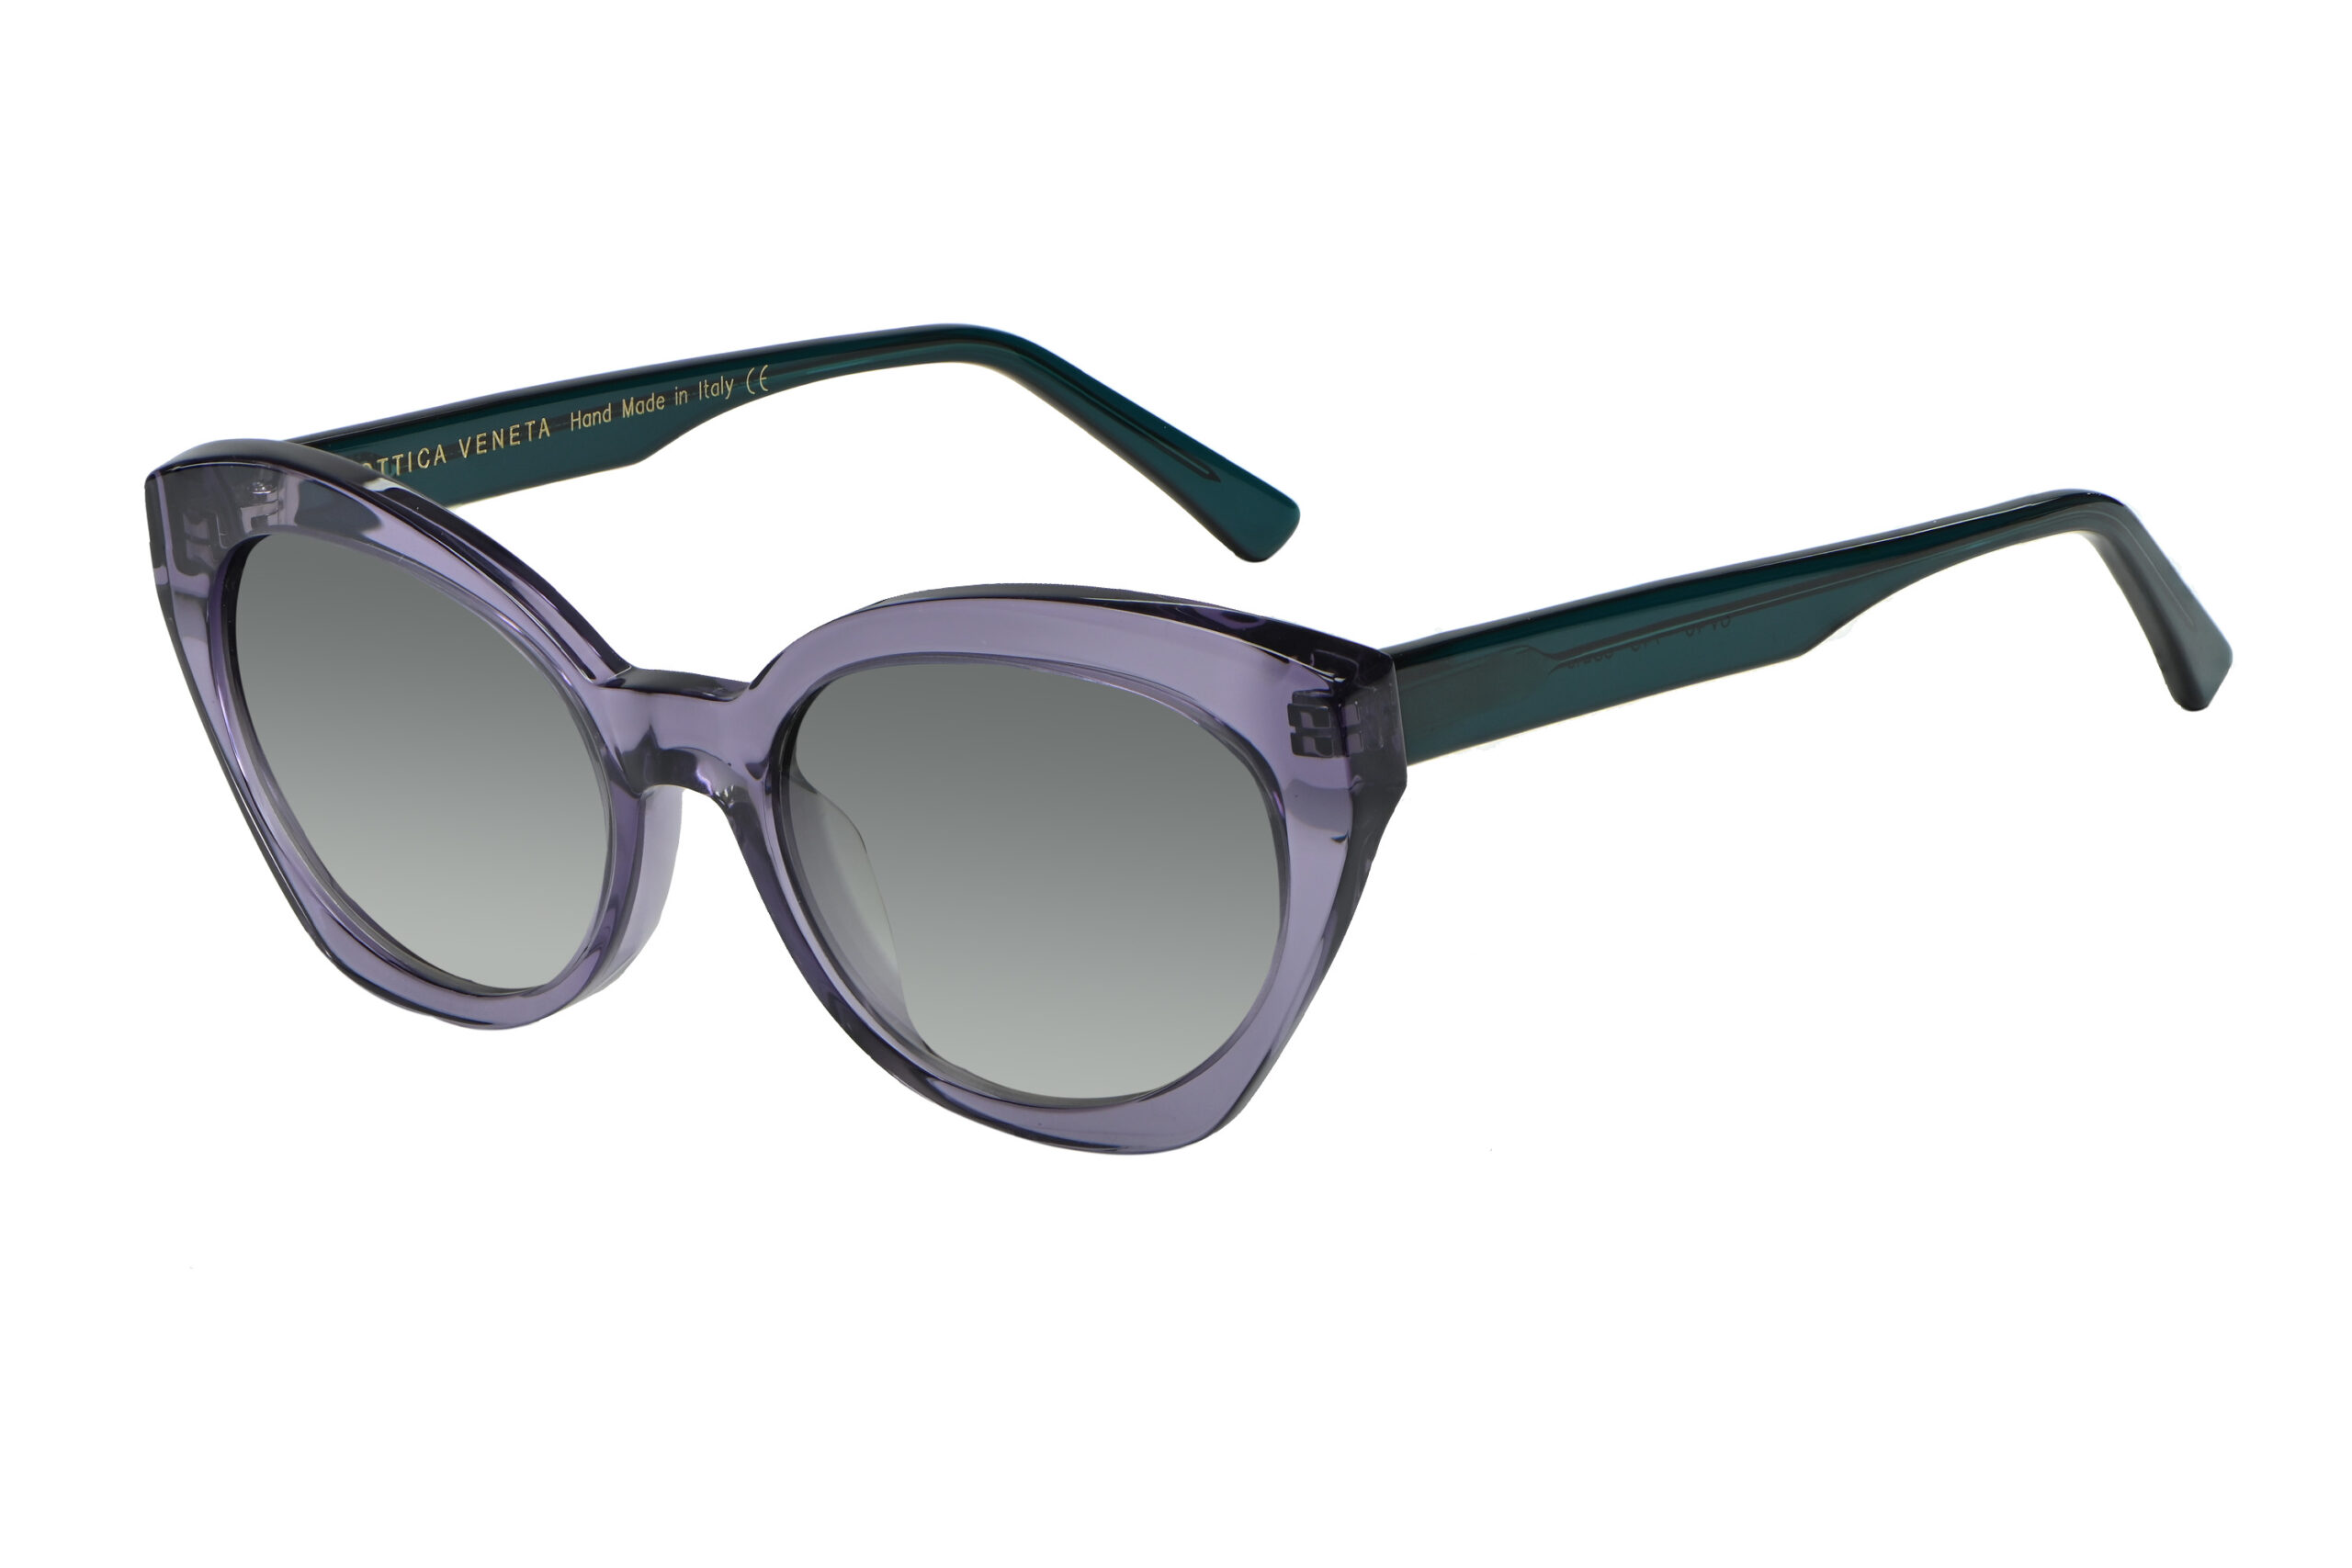 OV 46 c.743 – Purple front with green temples